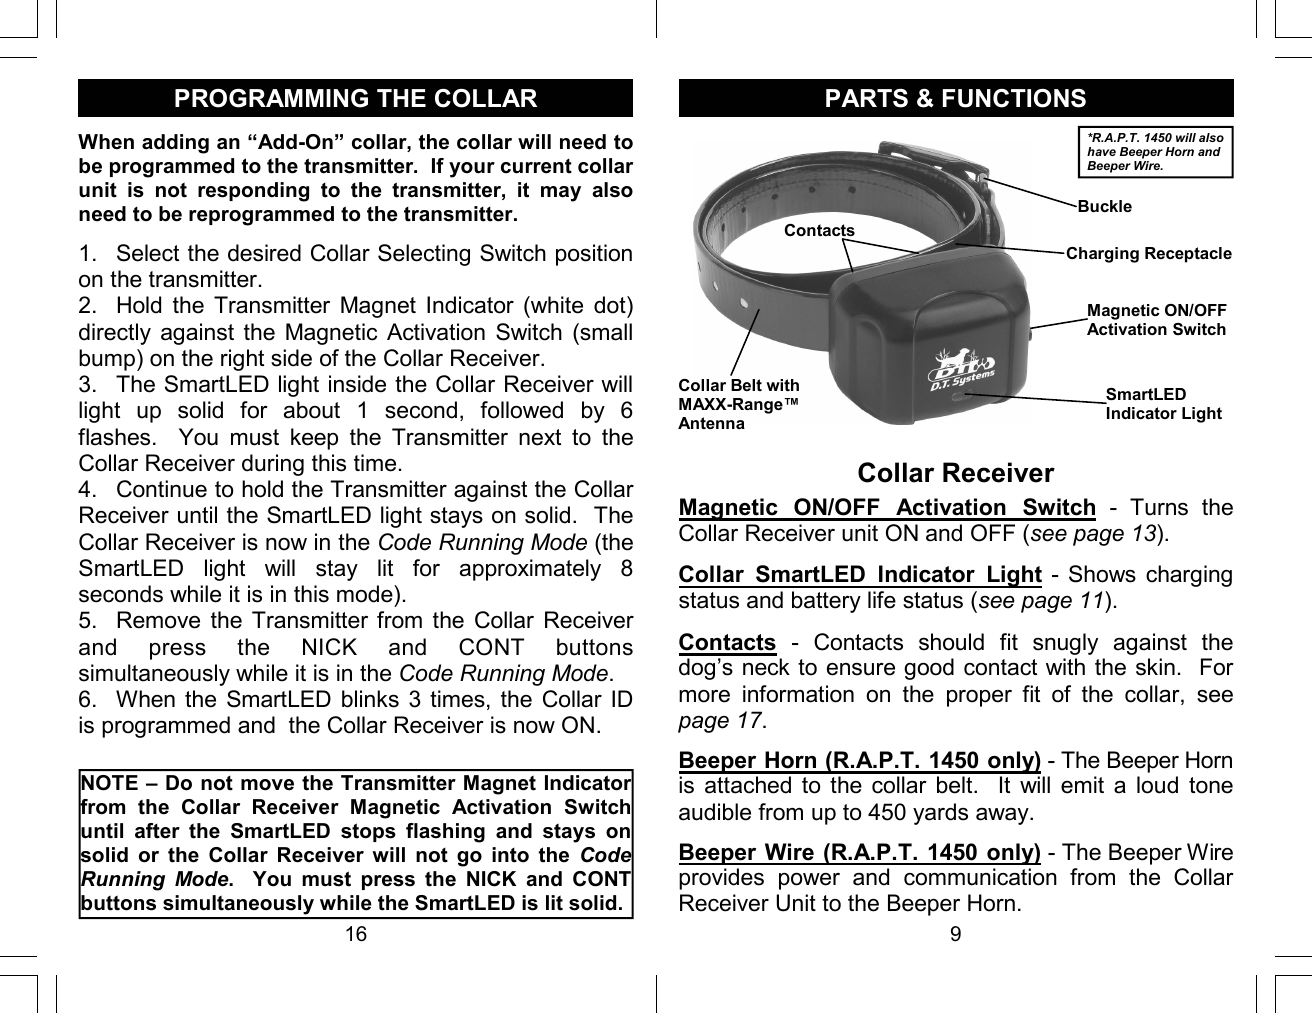 16 PROGRAMMING THE COLLAR When adding an “Add-On” collar, the collar will need to be programmed to the transmitter.  If your current collar unit  is  not  responding  to  the  transmitter,  it  may  also need to be reprogrammed to the transmitter.   1.  Select the desired Collar Selecting Switch position on the transmitter. 2.  Hold  the  Transmitter  Magnet  Indicator  (white  dot) directly against  the Magnetic  Activation Switch  (small bump) on the right side of the Collar Receiver. 3.  The SmartLED light inside the Collar Receiver will light  up  solid  for  about  1  second,  followed  by  6 flashes.    You  must  keep  the  Transmitter  next  to  the Collar Receiver during this time. 4.  Continue to hold the Transmitter against the Collar Receiver until the SmartLED light stays on solid.  The Collar Receiver is now in the Code Running Mode (the SmartLED  light  will  stay  lit  for  approximately  8 seconds while it is in this mode). 5.  Remove  the  Transmitter  from the  Collar  Receiver and  press  the  NICK  and  CONT  buttons simultaneously while it is in the Code Running Mode. 6.  When the SmartLED blinks 3 times, the Collar ID is programmed and  the Collar Receiver is now ON.   NOTE – Do not move the Transmitter Magnet Indicator from  the  Collar  Receiver  Magnetic  Activation  Switch until  after  the  SmartLED  stops  flashing  and  stays  on solid  or  the  Collar  Receiver  will  not  go  into  the  Code Running  Mode.    You  must  press  the  NICK  and  CONT buttons simultaneously while the SmartLED is lit solid.  9 Collar Receiver PARTS &amp; FUNCTIONS Contacts  -  Contacts  should  fit  snugly  against  the dog’s neck to ensure good contact with the skin.  For more  information  on  the  proper  fit  of  the  collar,  see page 17. *R.A.P.T. 1450 will also have Beeper Horn and Beeper Wire. Charging Receptacle SmartLED Indicator Light Magnetic ON/OFF Activation Switch Contacts Collar Belt with MAXX-Range™   Antenna Collar  SmartLED  Indicator  Light -  Shows charging status and battery life status (see page 11). Magnetic  ON/OFF  Activation  Switch  -  Turns  the Collar Receiver unit ON and OFF (see page 13). Buckle Beeper Horn (R.A.P.T. 1450 only) - The Beeper Horn is  attached  to the  collar  belt.    It  will  emit  a  loud  tone audible from up to 450 yards away. Beeper Wire (R.A.P.T. 1450 only) - The Beeper Wire provides  power  and  communication  from  the  Collar Receiver Unit to the Beeper Horn. 